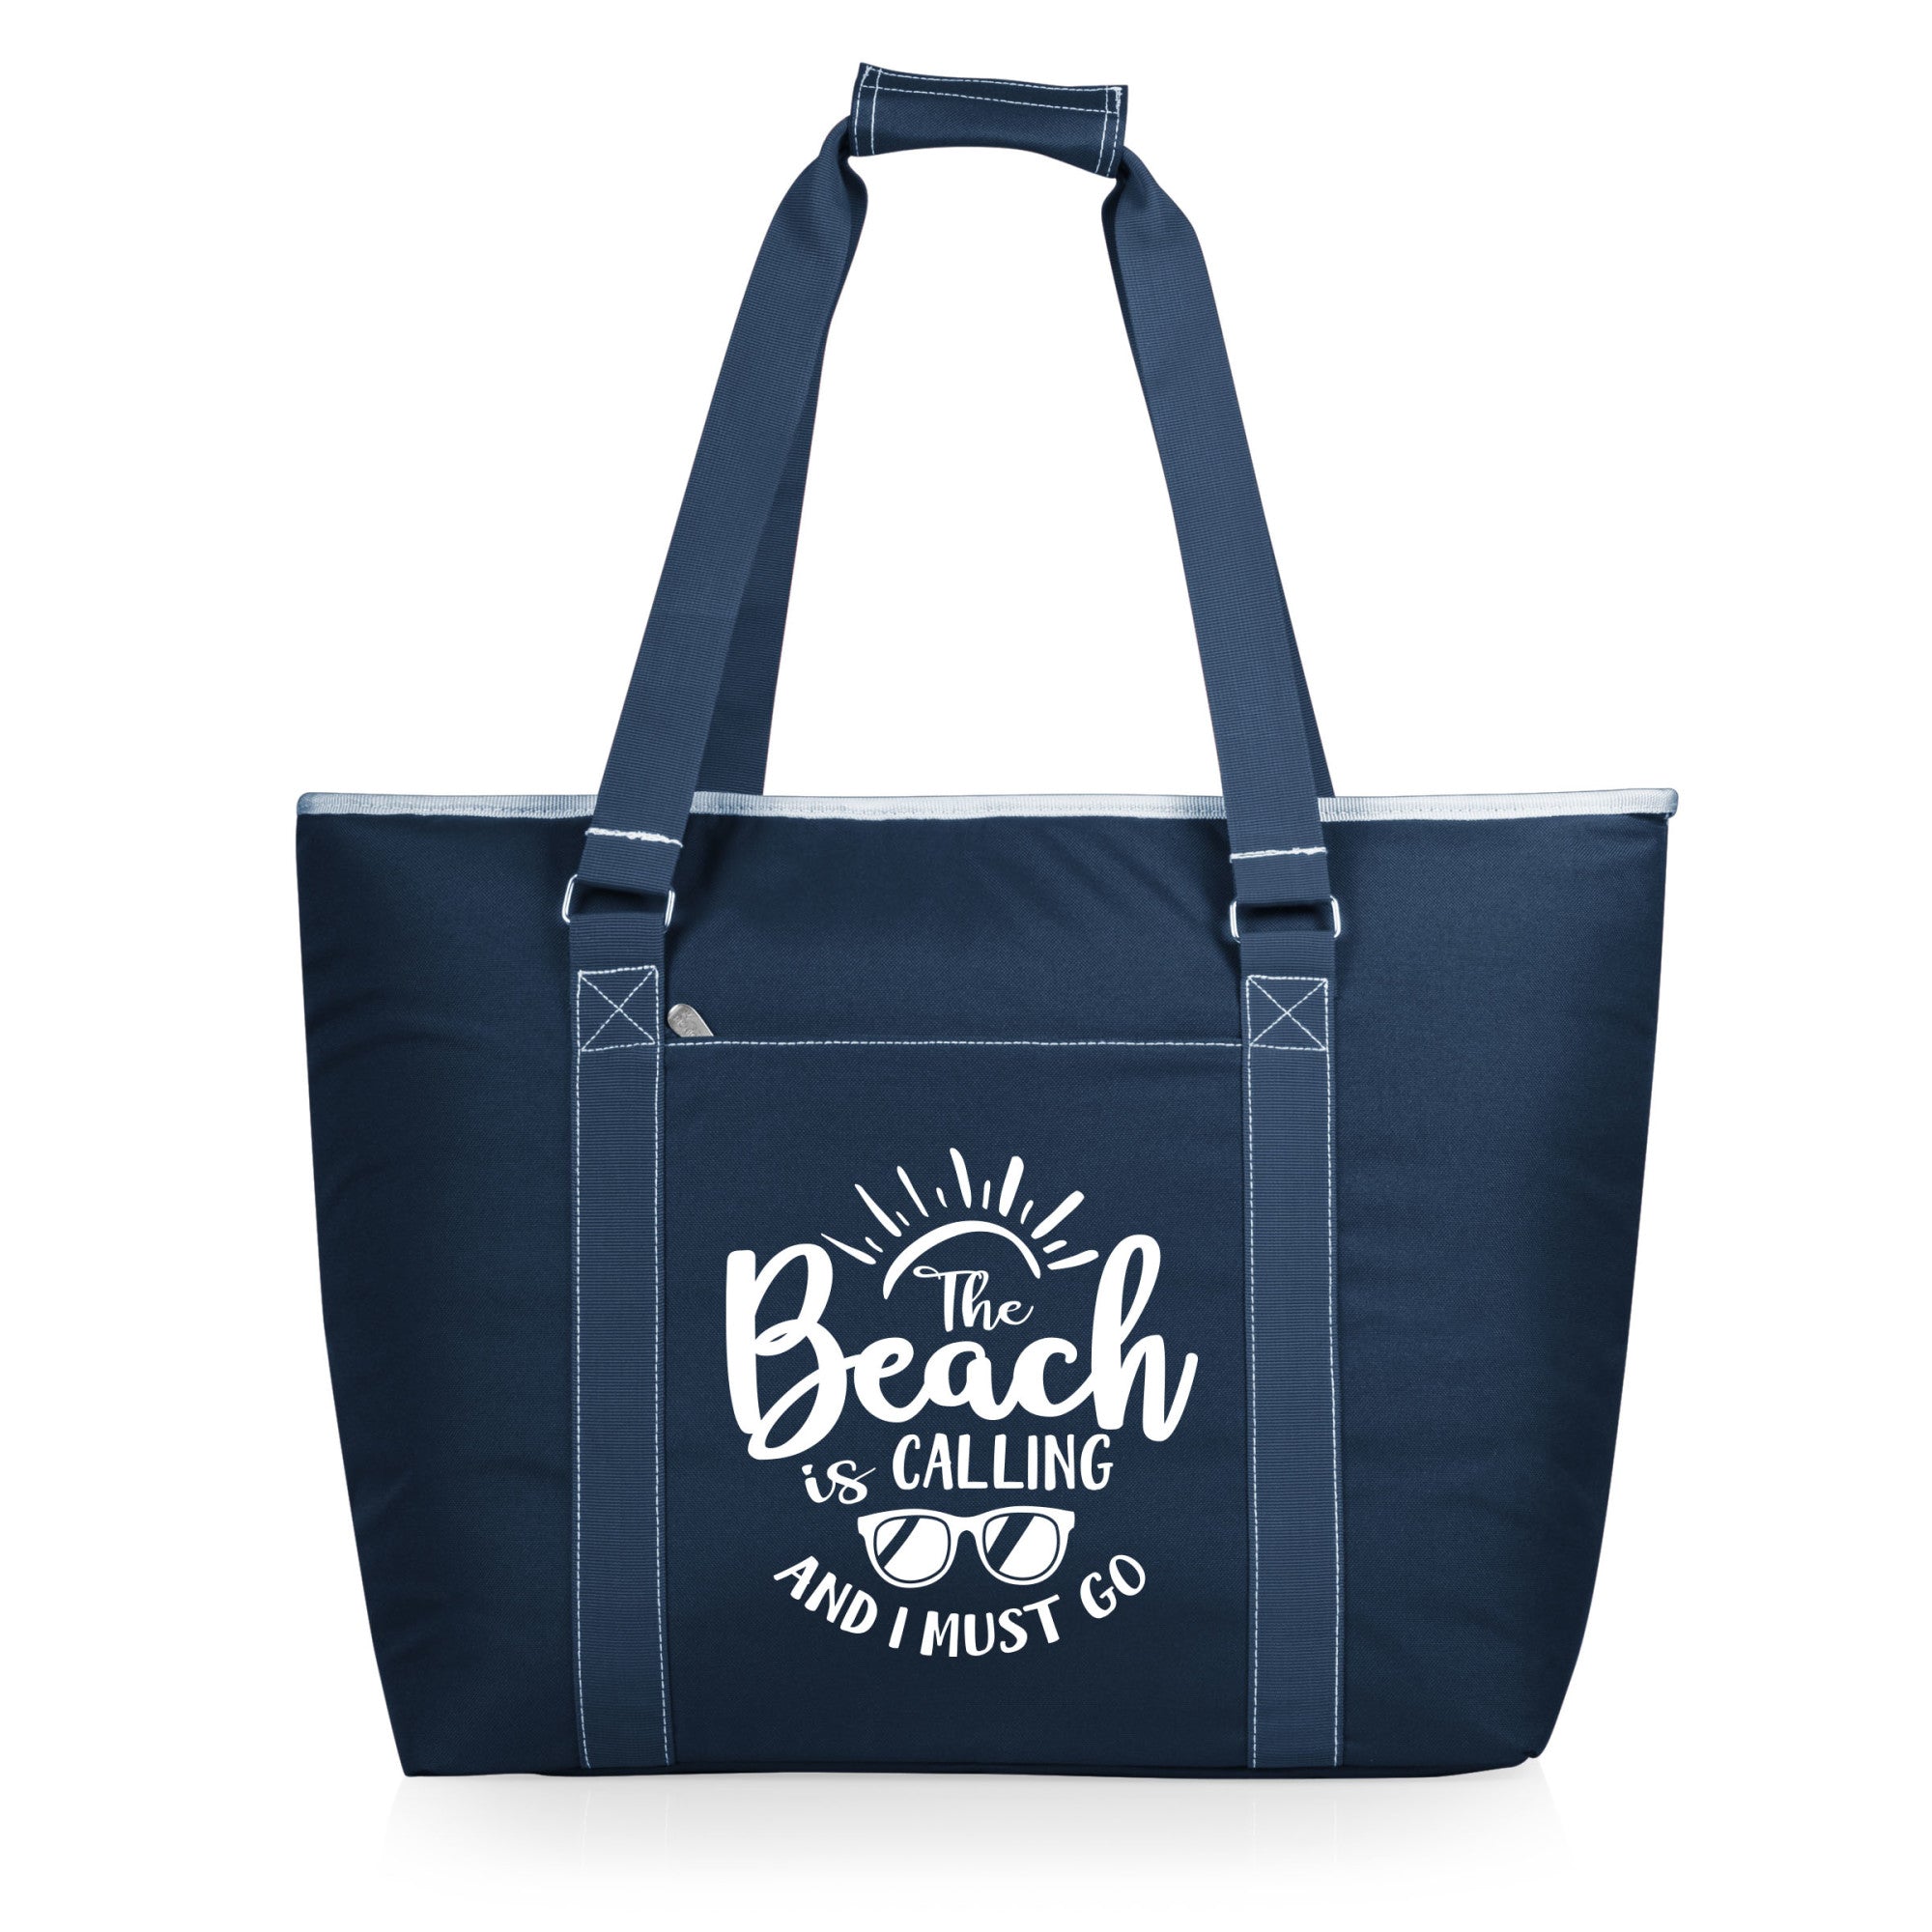 Beach Sayings The Beach is Calling and I Must Go - Tahoe XL Cooler Tote Bag